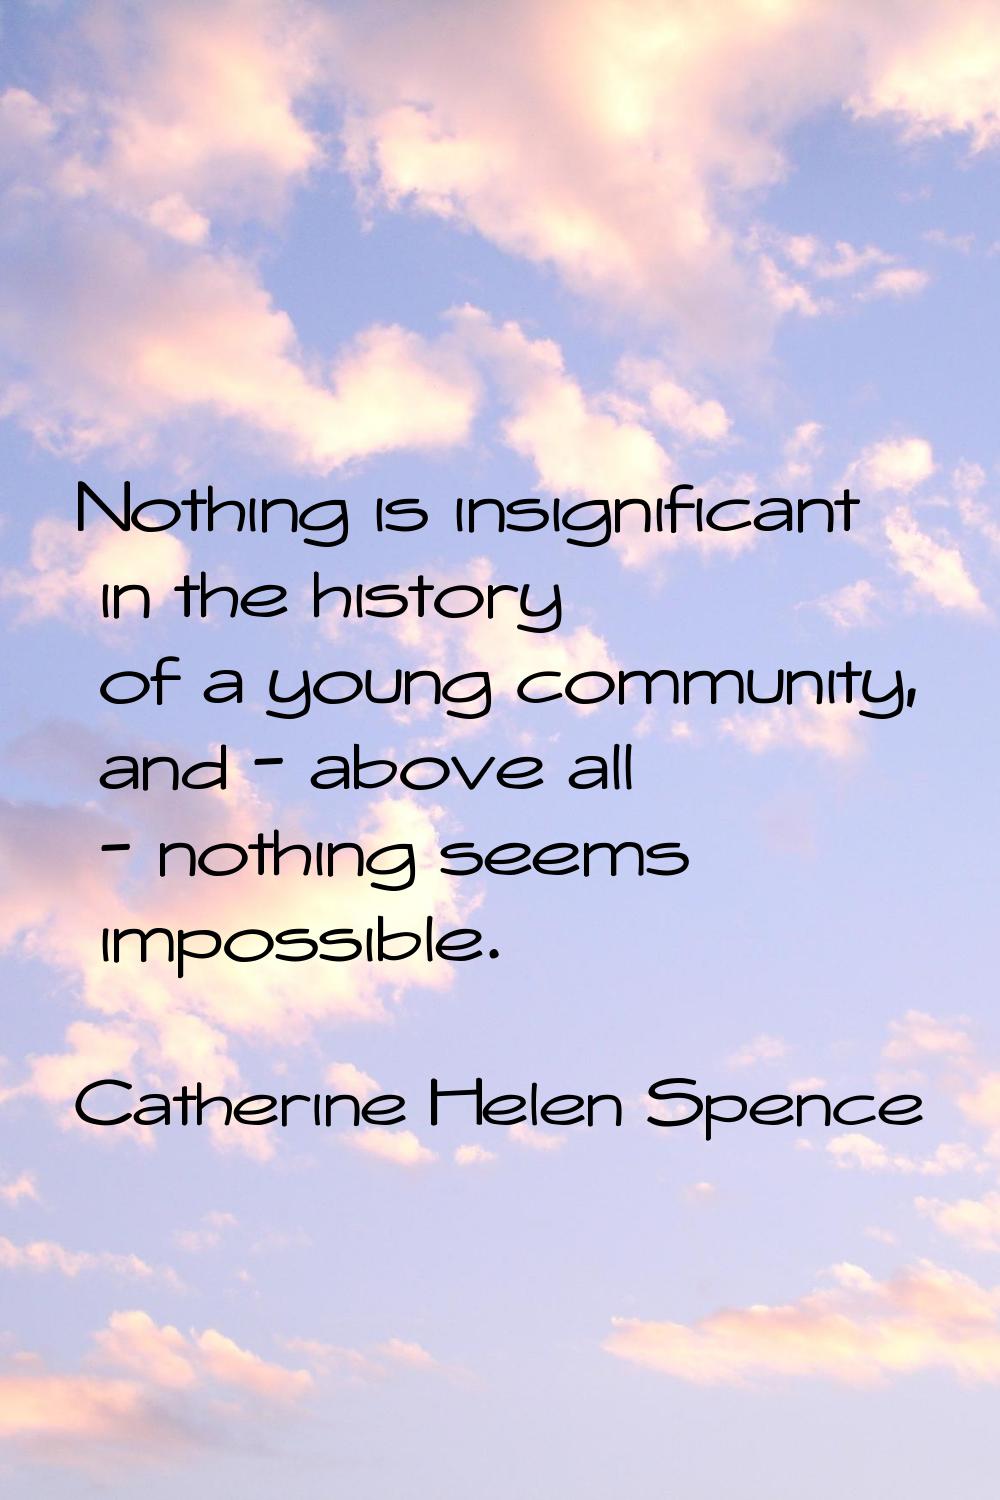 Nothing is insignificant in the history of a young community, and - above all - nothing seems impos